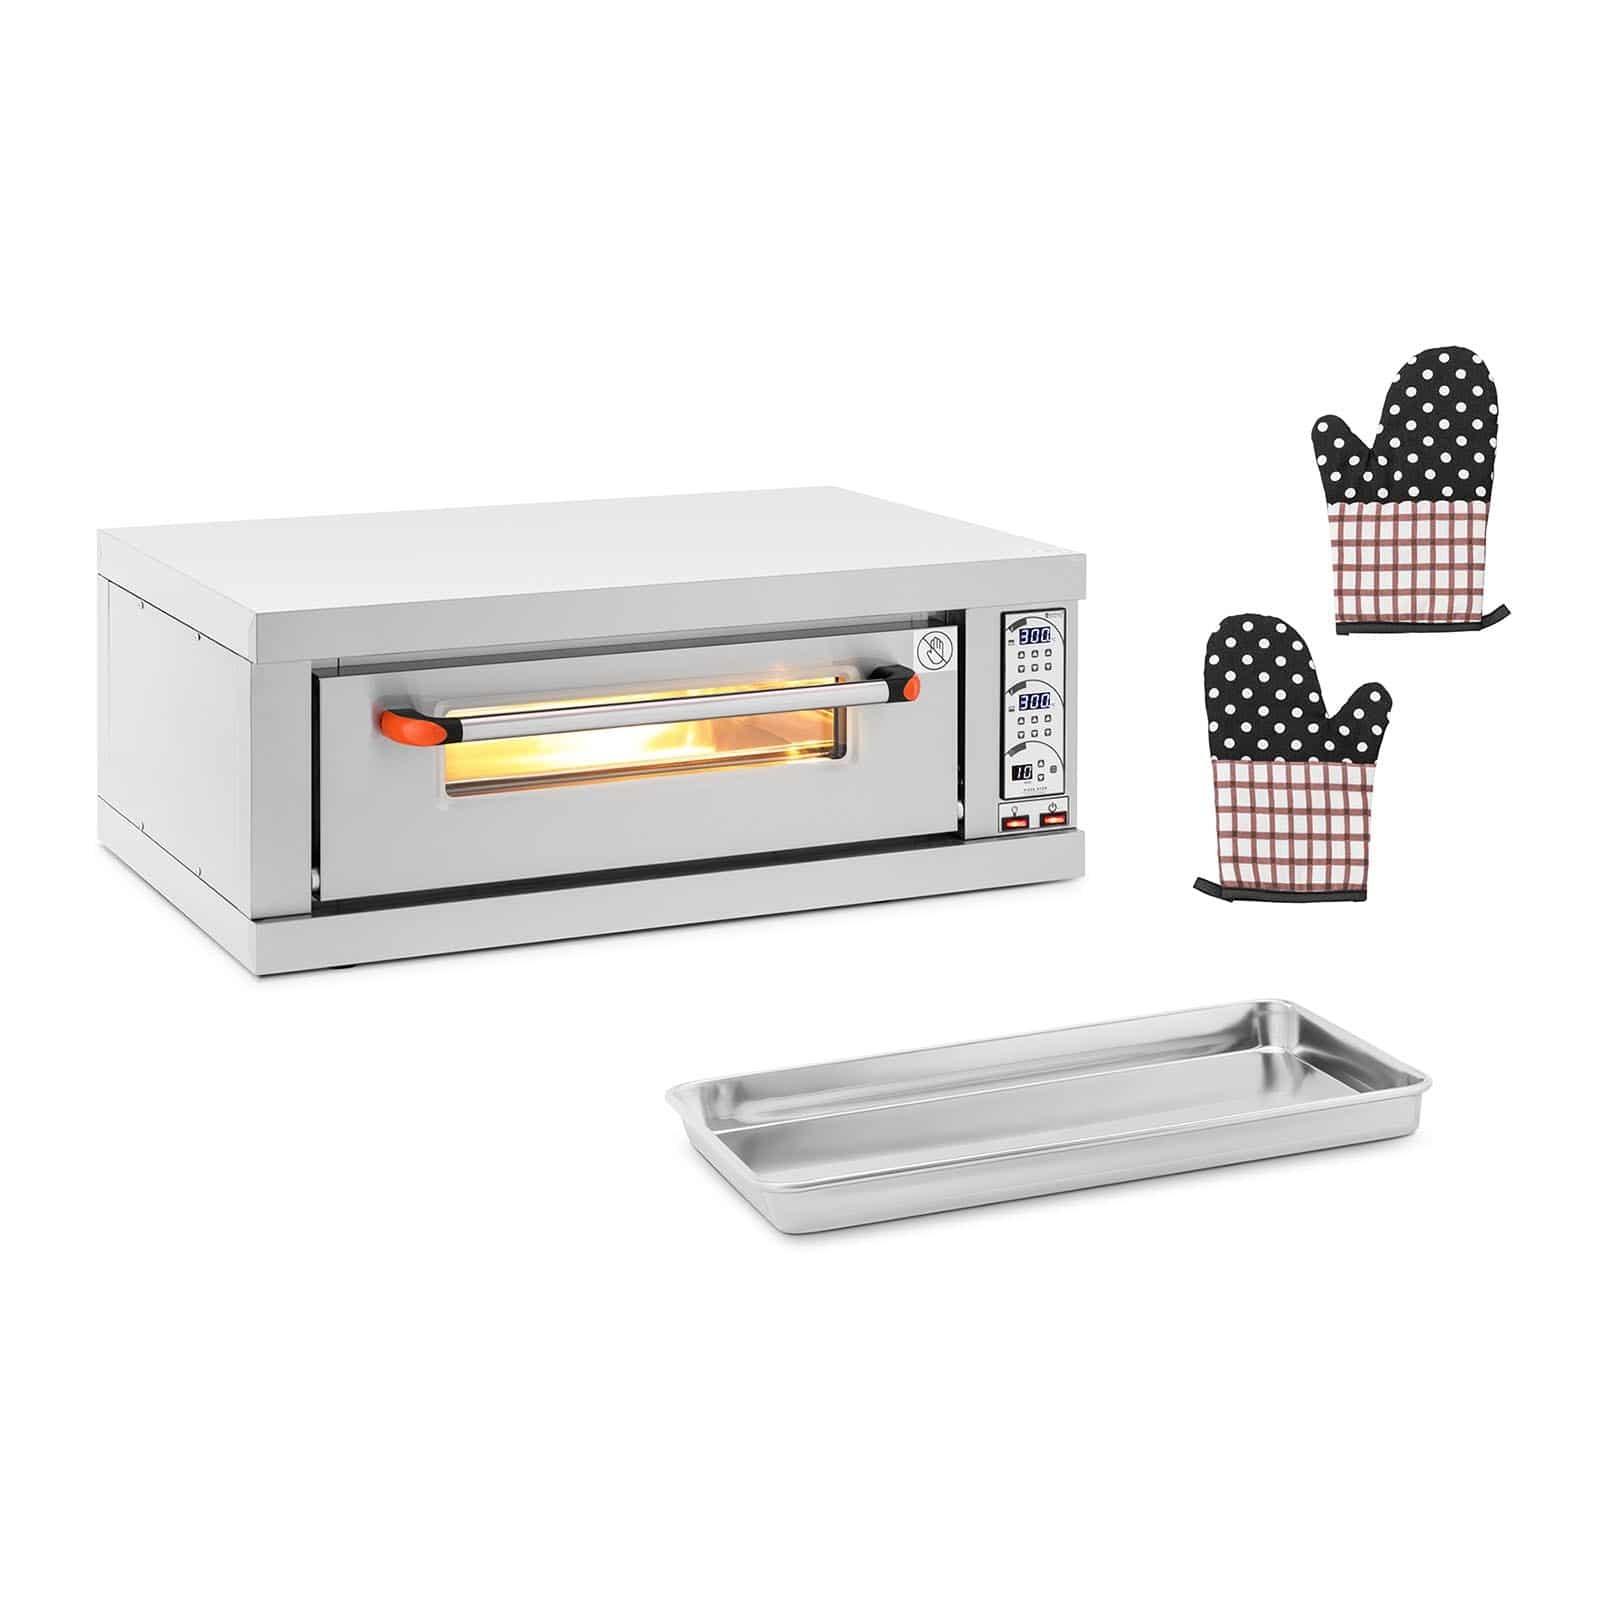 Royal Catering pizzaoven - 1 kamer - 3200 W - Ø 40 cm - Marmer - Royal Catering